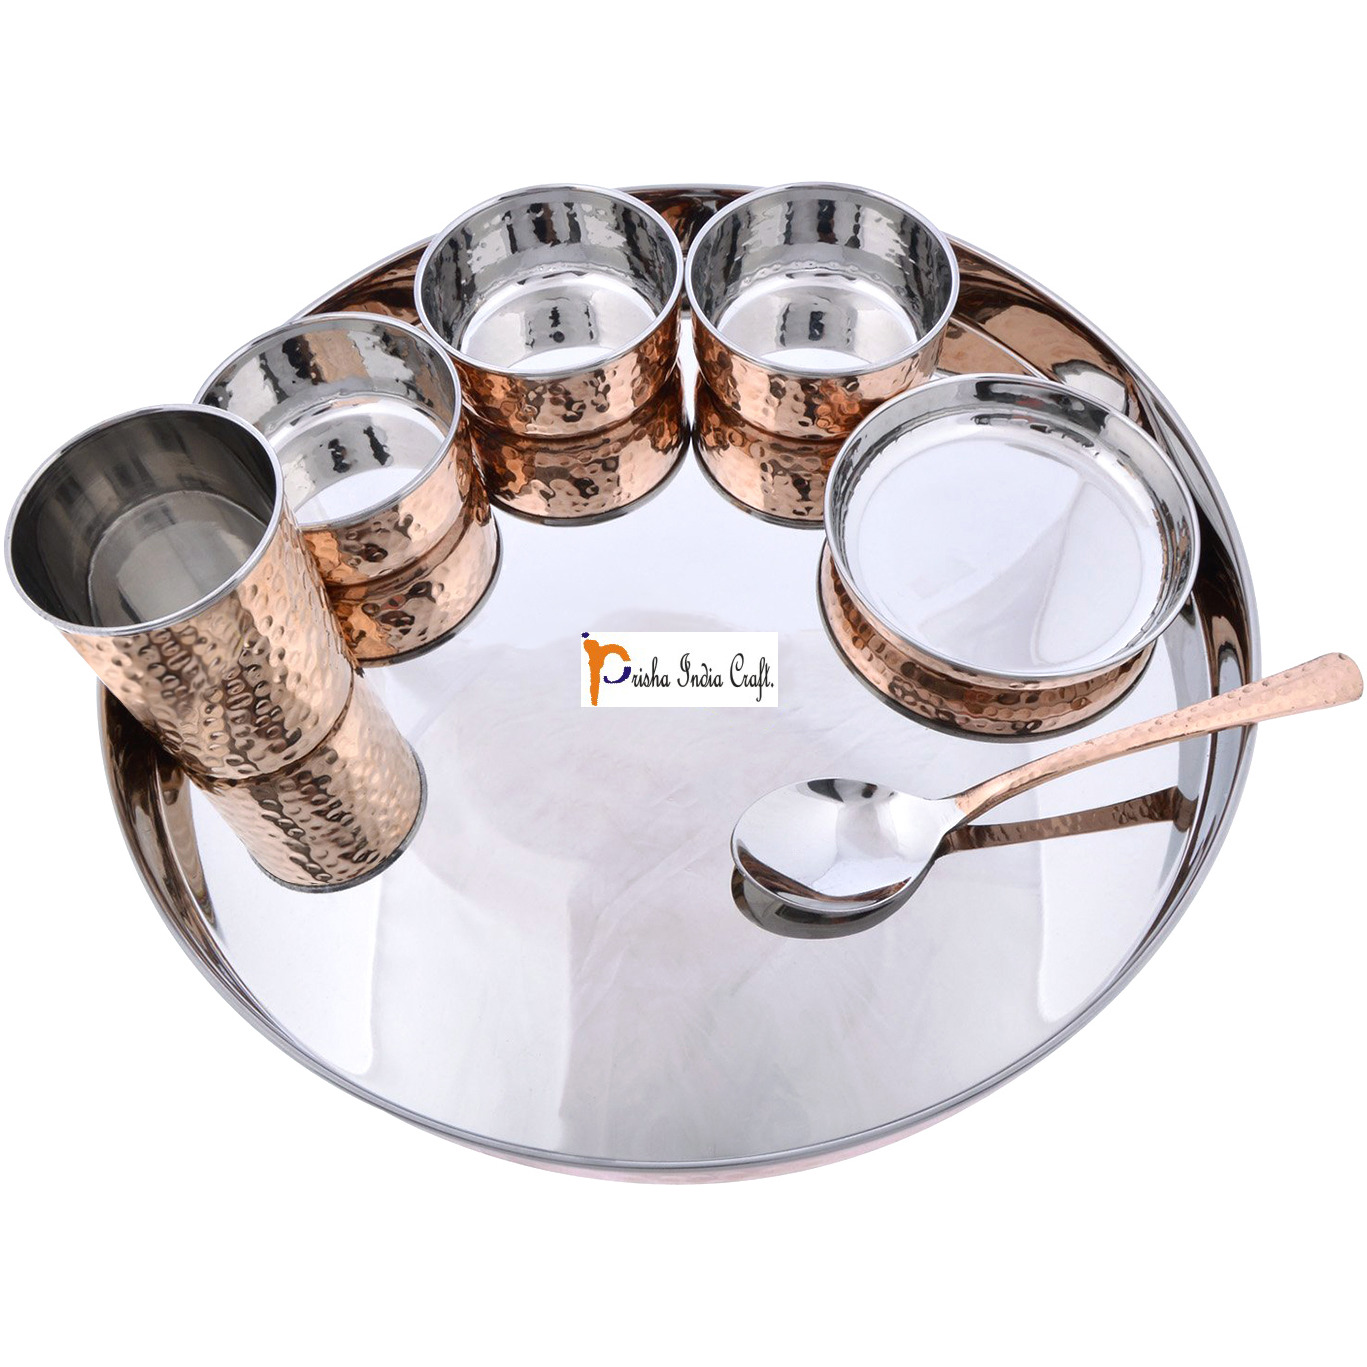 Prisha India Craft B. Set of 5 Dinnerware Traditional Stainless Steel Copper Dinner Set of Thali Plate, Bowls, Glass and Spoon, Dia 13  With 1 Pure Copper Mughal Pitcher Jug - Christmas Gift